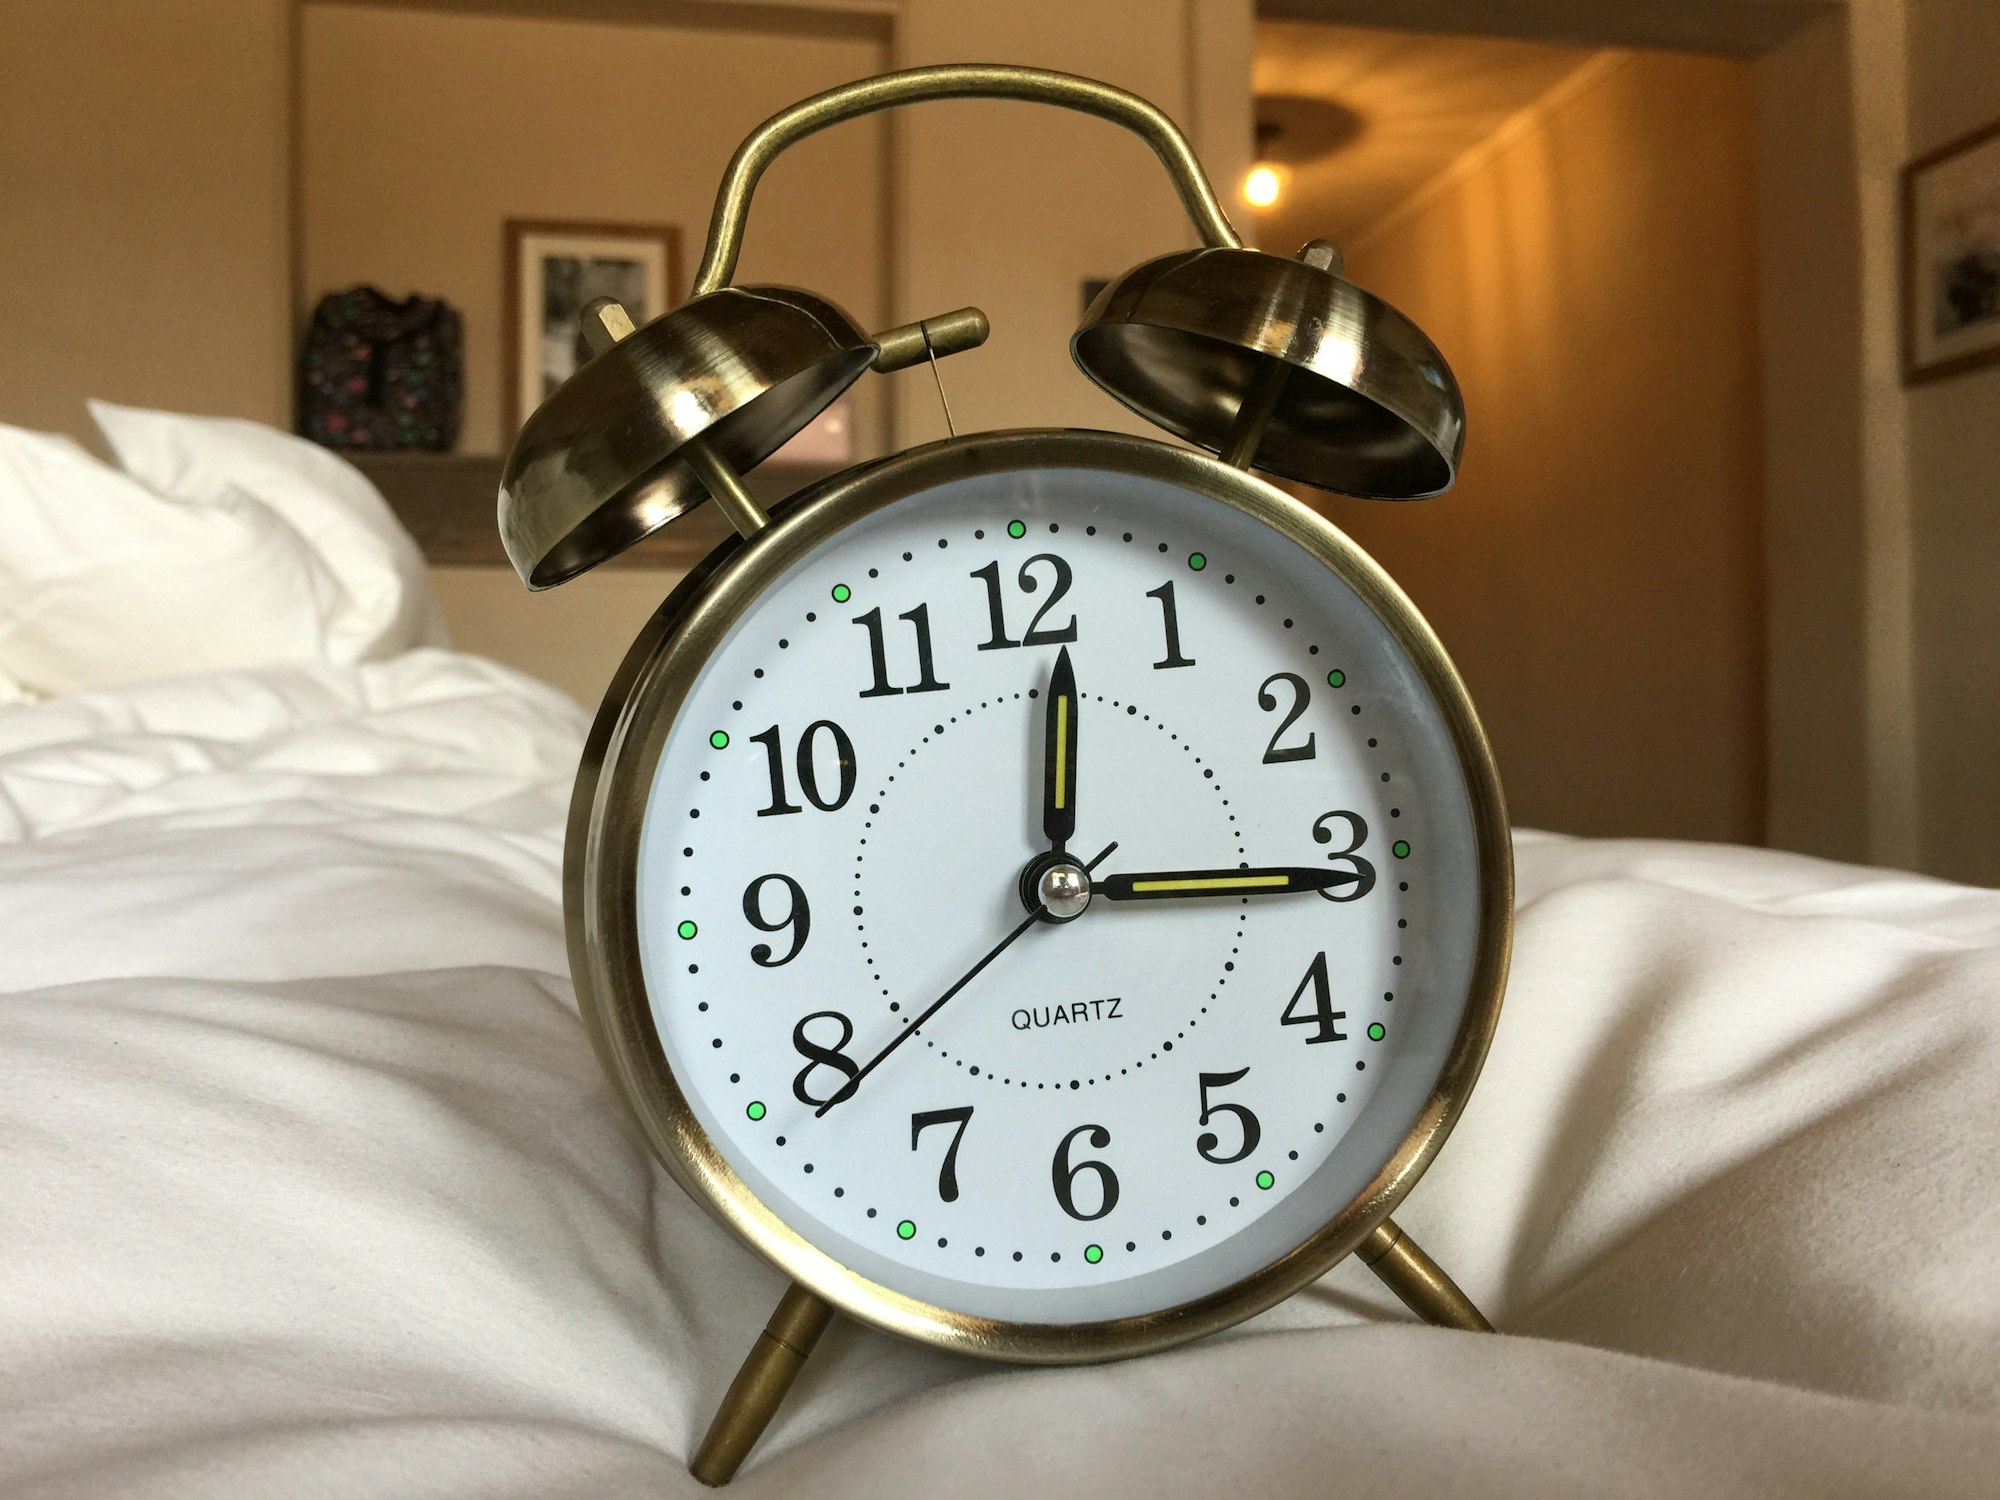 An old fashioned alarm clock